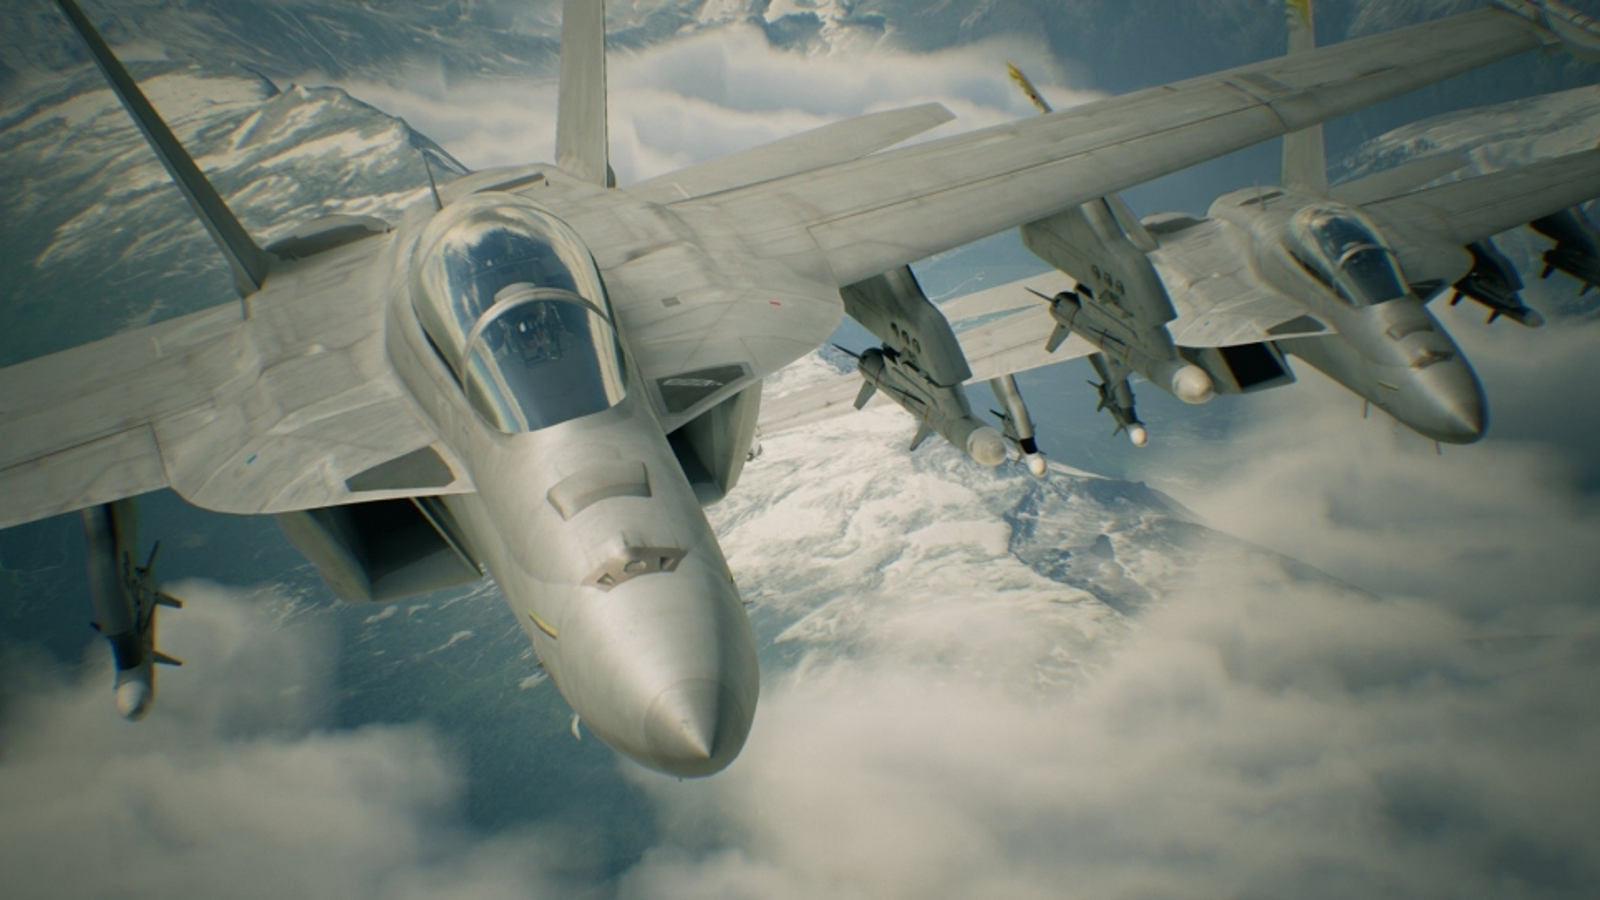 ACE COMBAT 7: Skies Unknown Mission 7 Gameplay